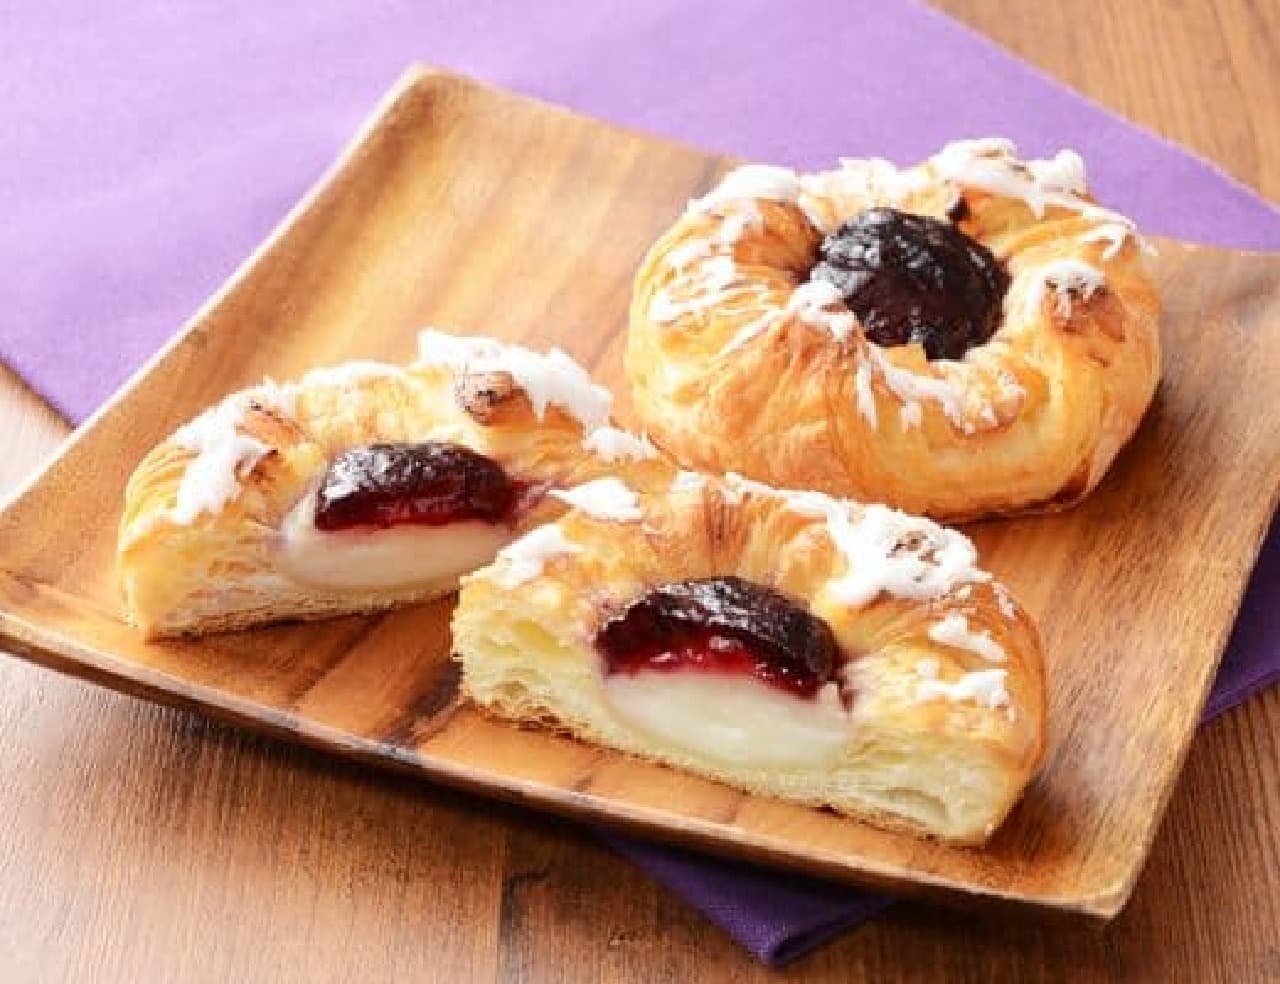 Lawson "Blueberry & Cheese Danish with French Fermented Butter